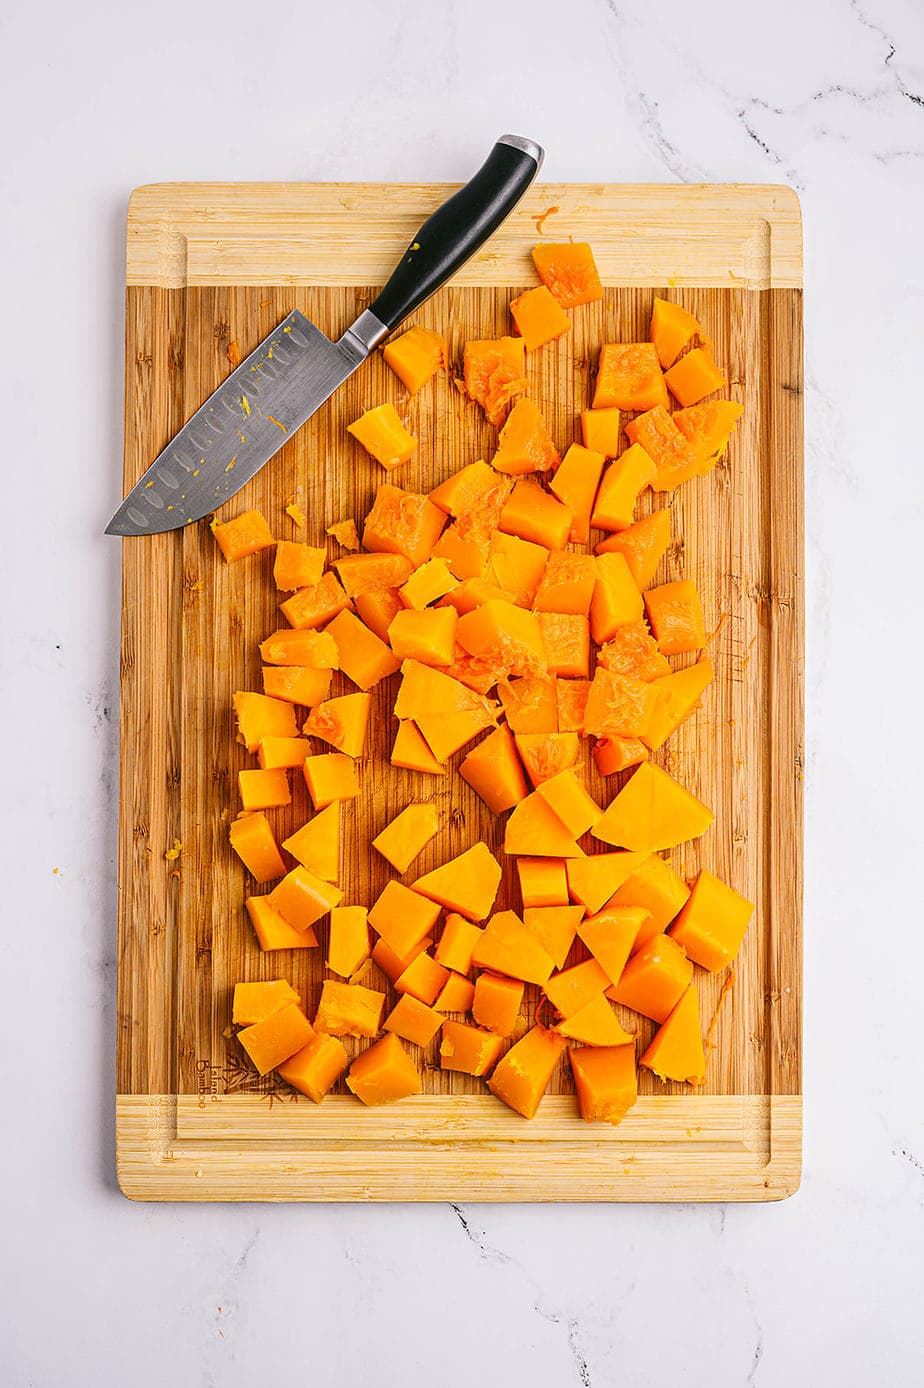 Overhead photo of cubed and cut butternut squash on a wooden cutting board with a chef's knife off to the side.